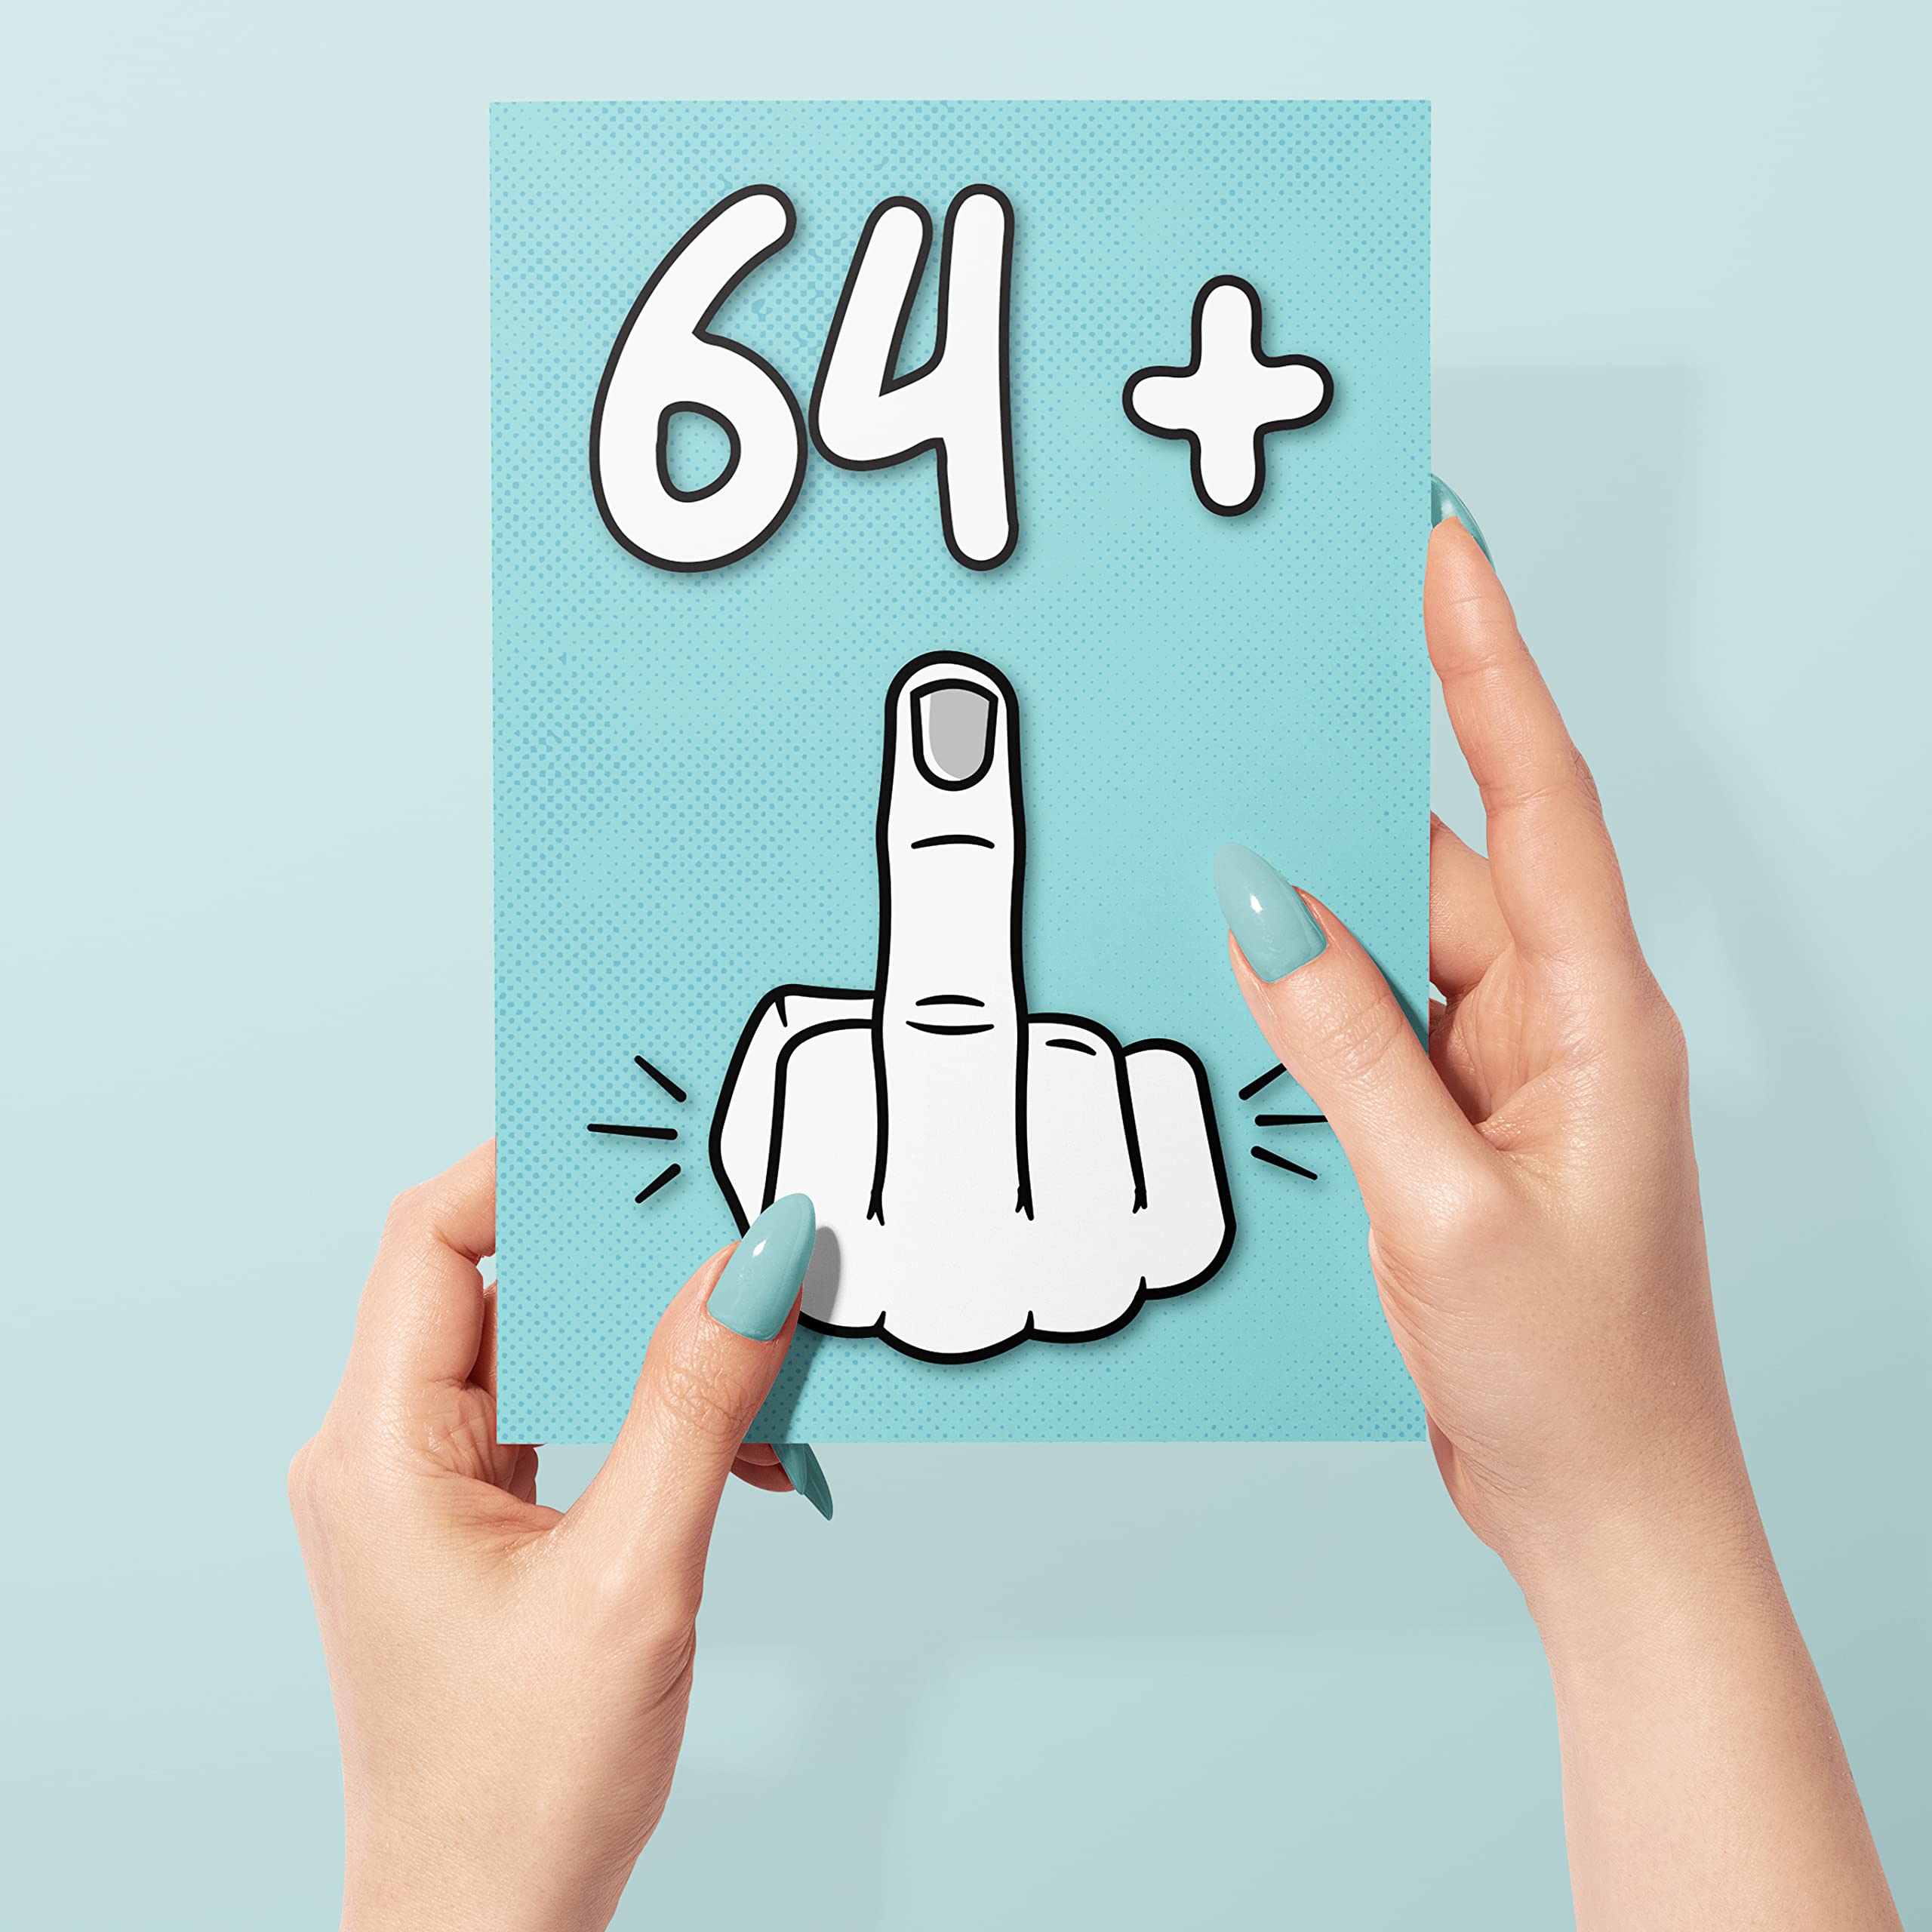 65th Birthday Card, 64 and 1, Funny Birthday Card for 65 Year Old Women or Men, 5x7